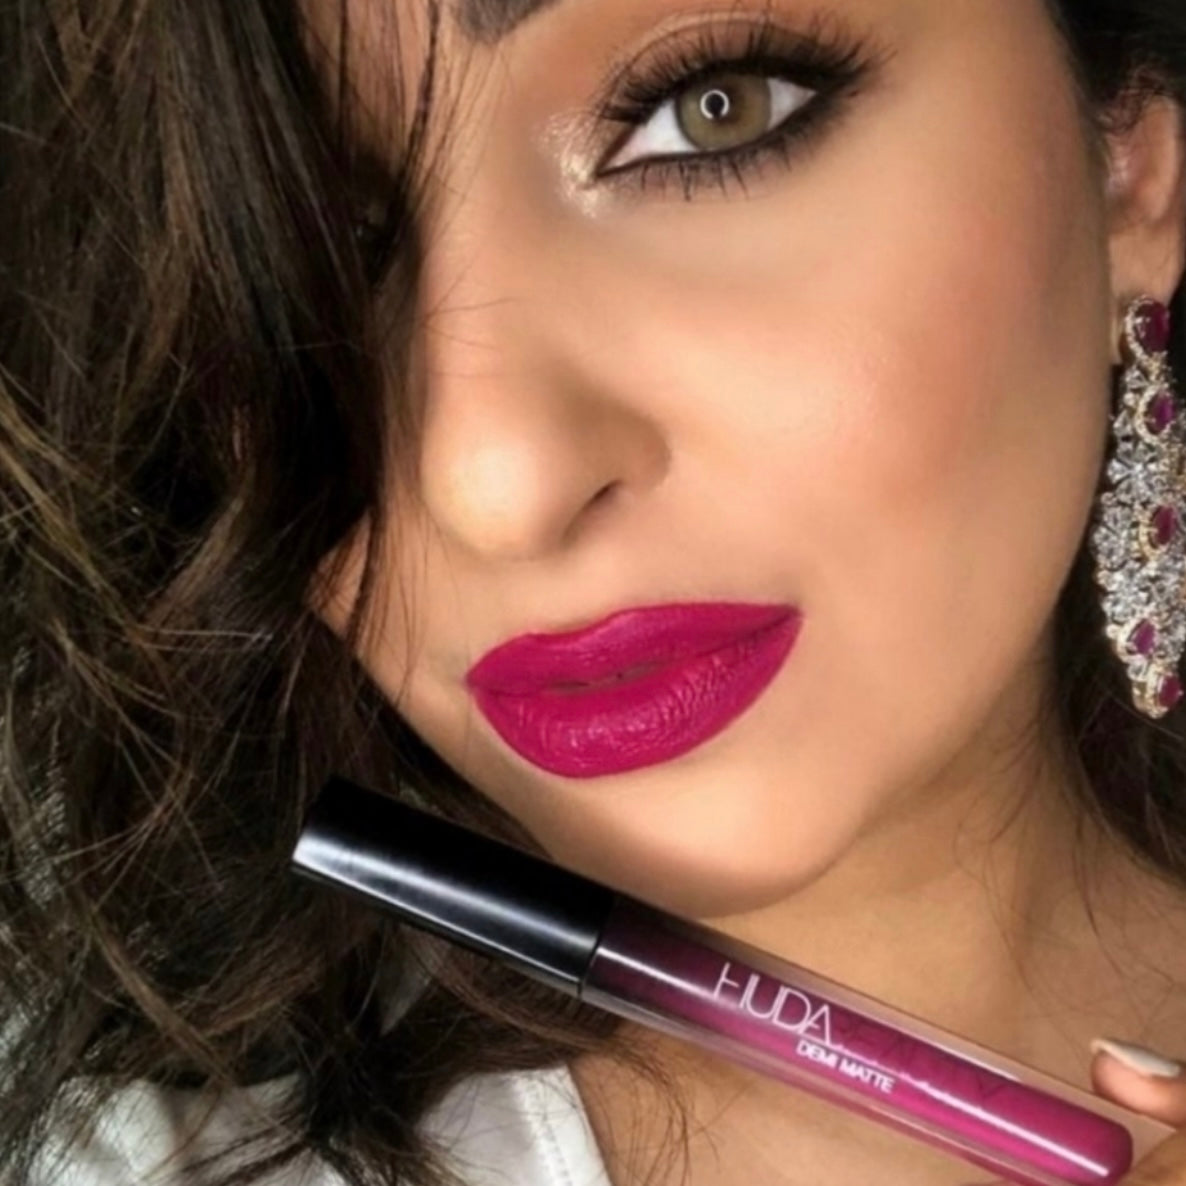 Inspired by Huda’s love for self-expression through makeup, Huda Beauty Demi Matte is a bold Cream Lipstick in the color “Passionista,” This beautiful lipstick is showcasing a full spectrum of an ultra-feminine color to complement every one of your alter egos.  Saturated in pigment, the creamy texture glides on with an intense color release from the first swipe, creating a lacquer-like sheen which highlights and enhances the natural contours of your pout. Only available at FaceTreasures.Com